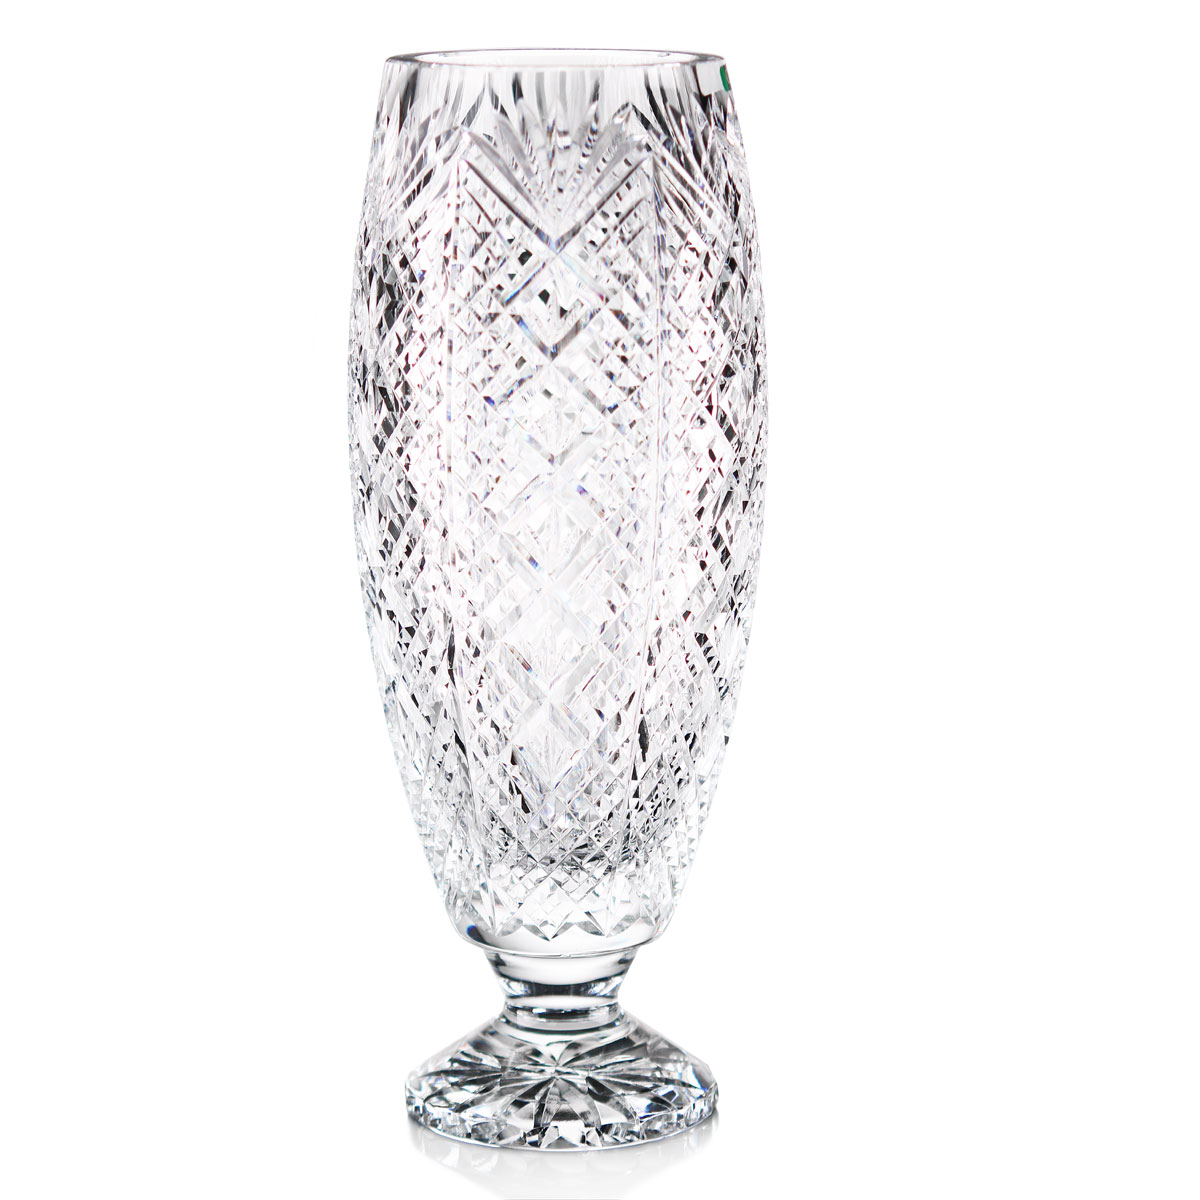 Cashs Ireland, Art Collection, Aideen, Limited Edition Crystal Vase